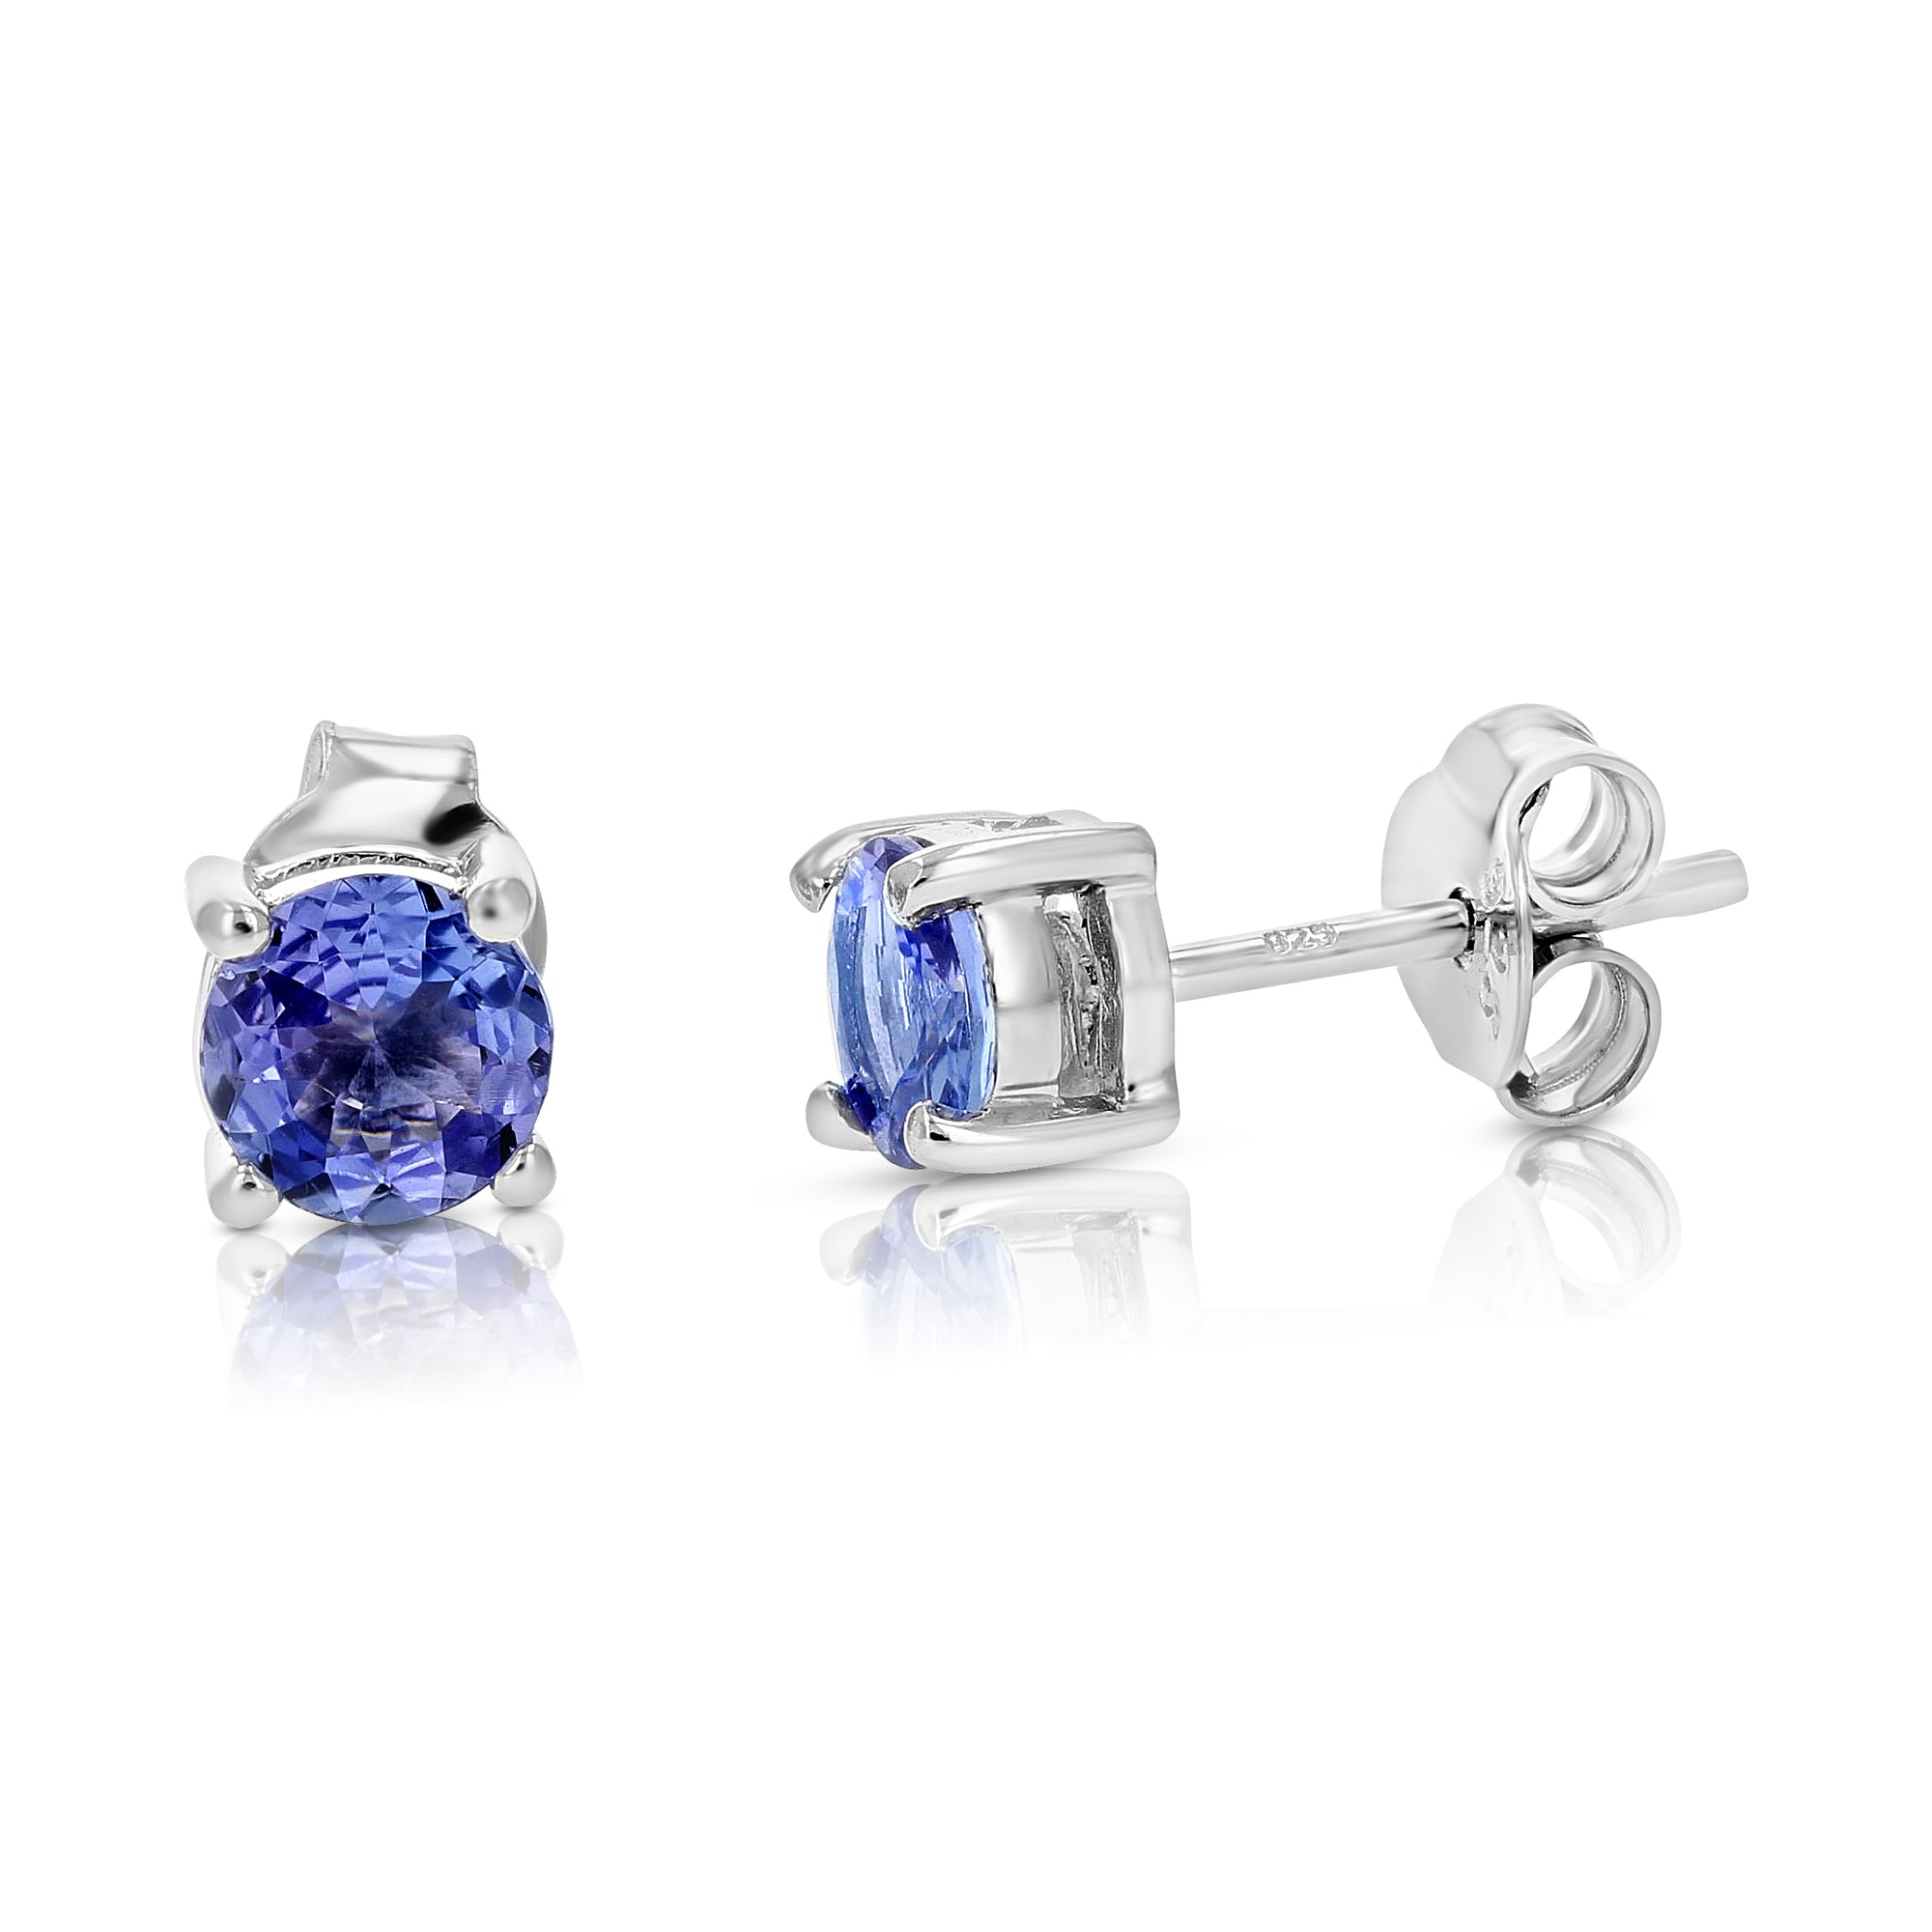 1/2 cttw Round Tanzanite Stud Earrings in .925 Sterling Silver with Rhodium